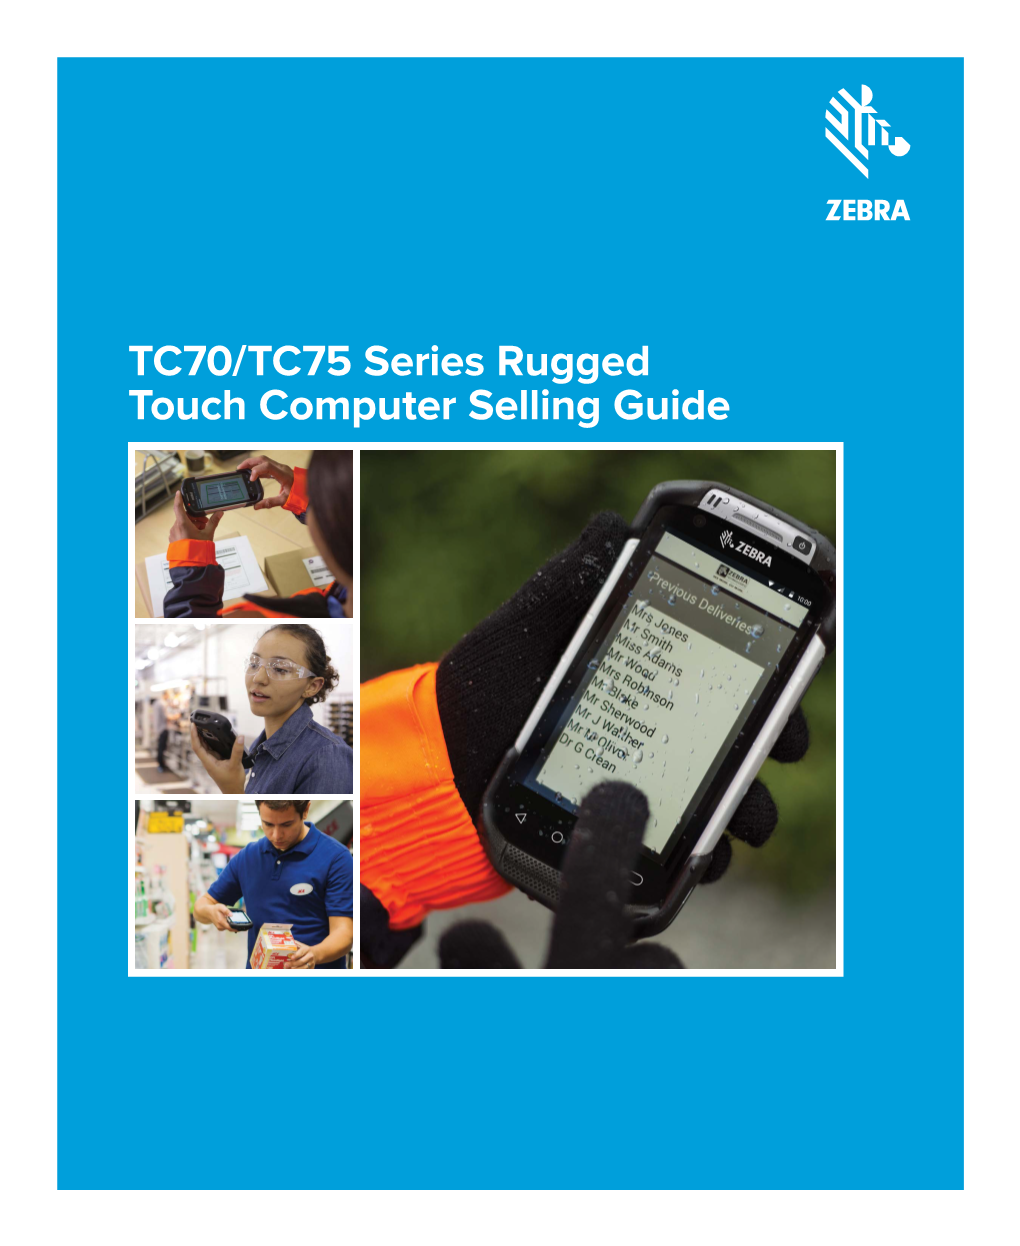 TC70/TC75 Series Rugged Touch Computer Selling Guide the RIGHT DEVICE MAKES ALL the DIFFERENCE